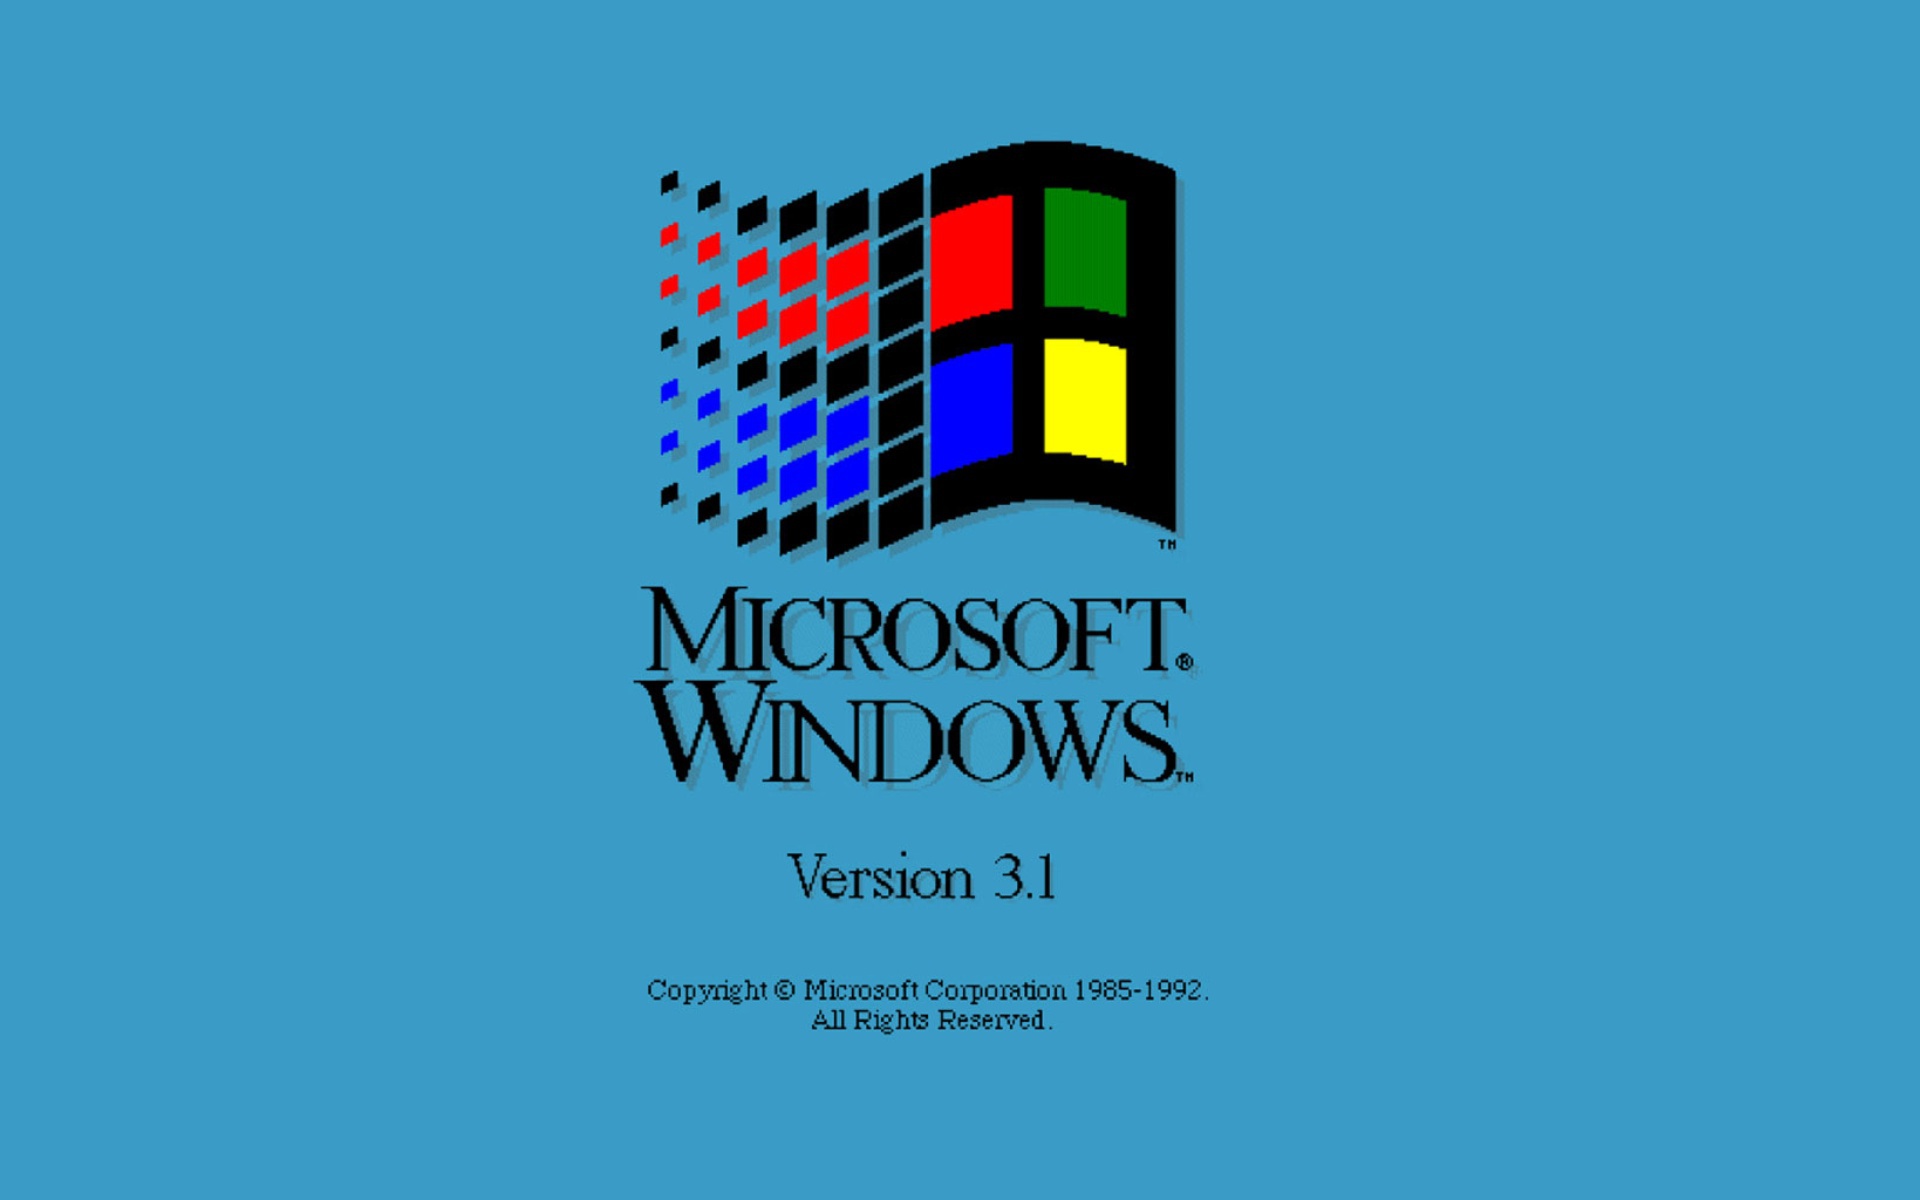 Microsoft Windows Retro Wallpapers And Images Wallpapers Pictures Photos